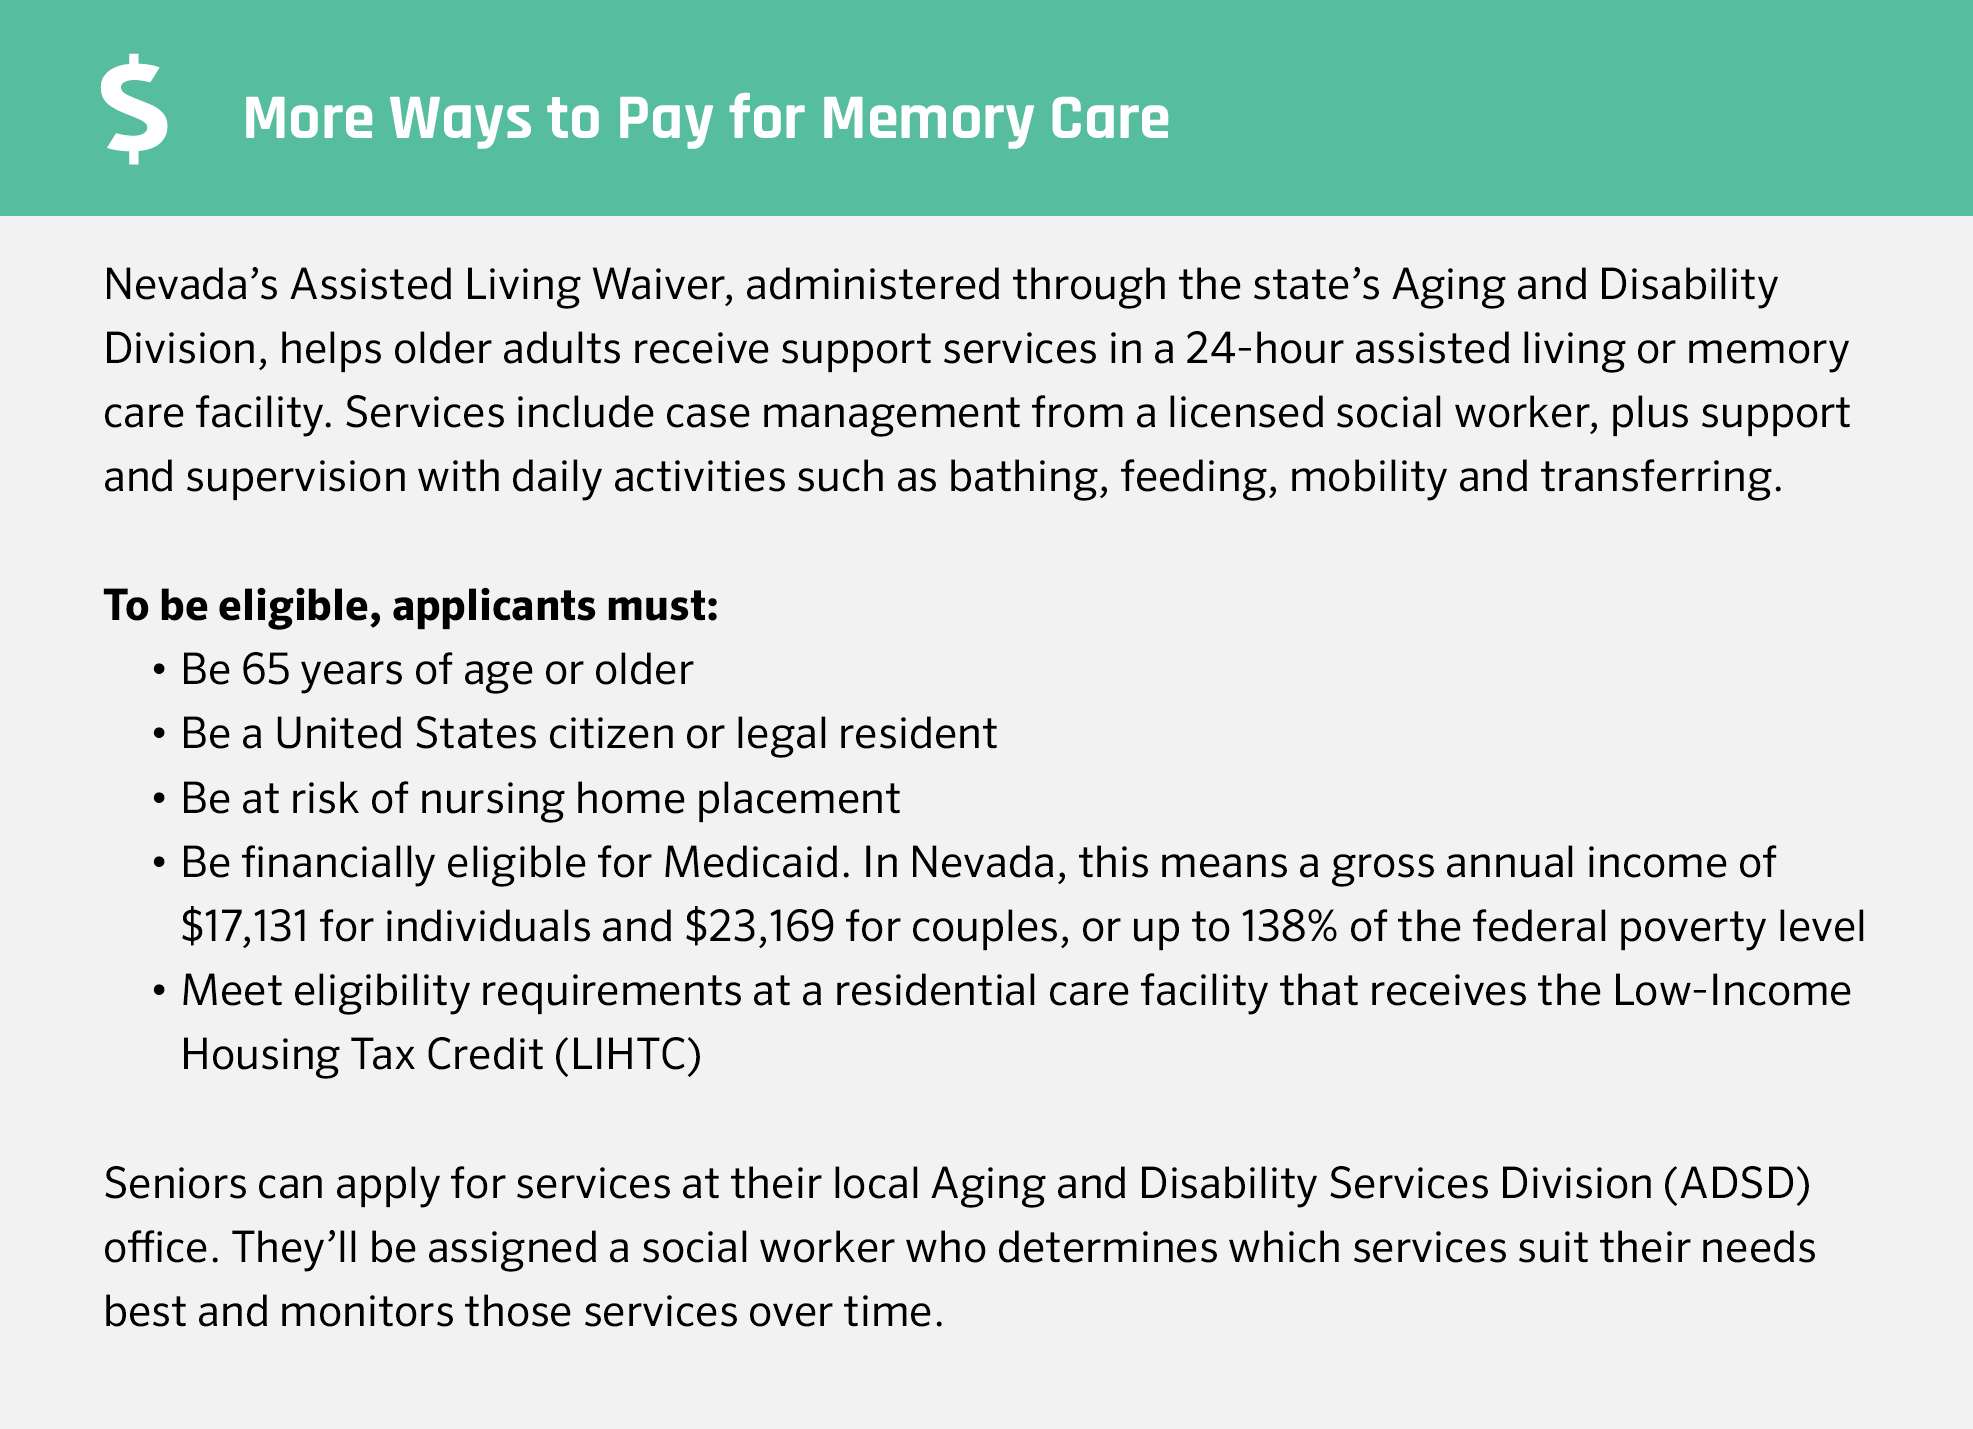 Financial Assistance for Memory Care in Nevada